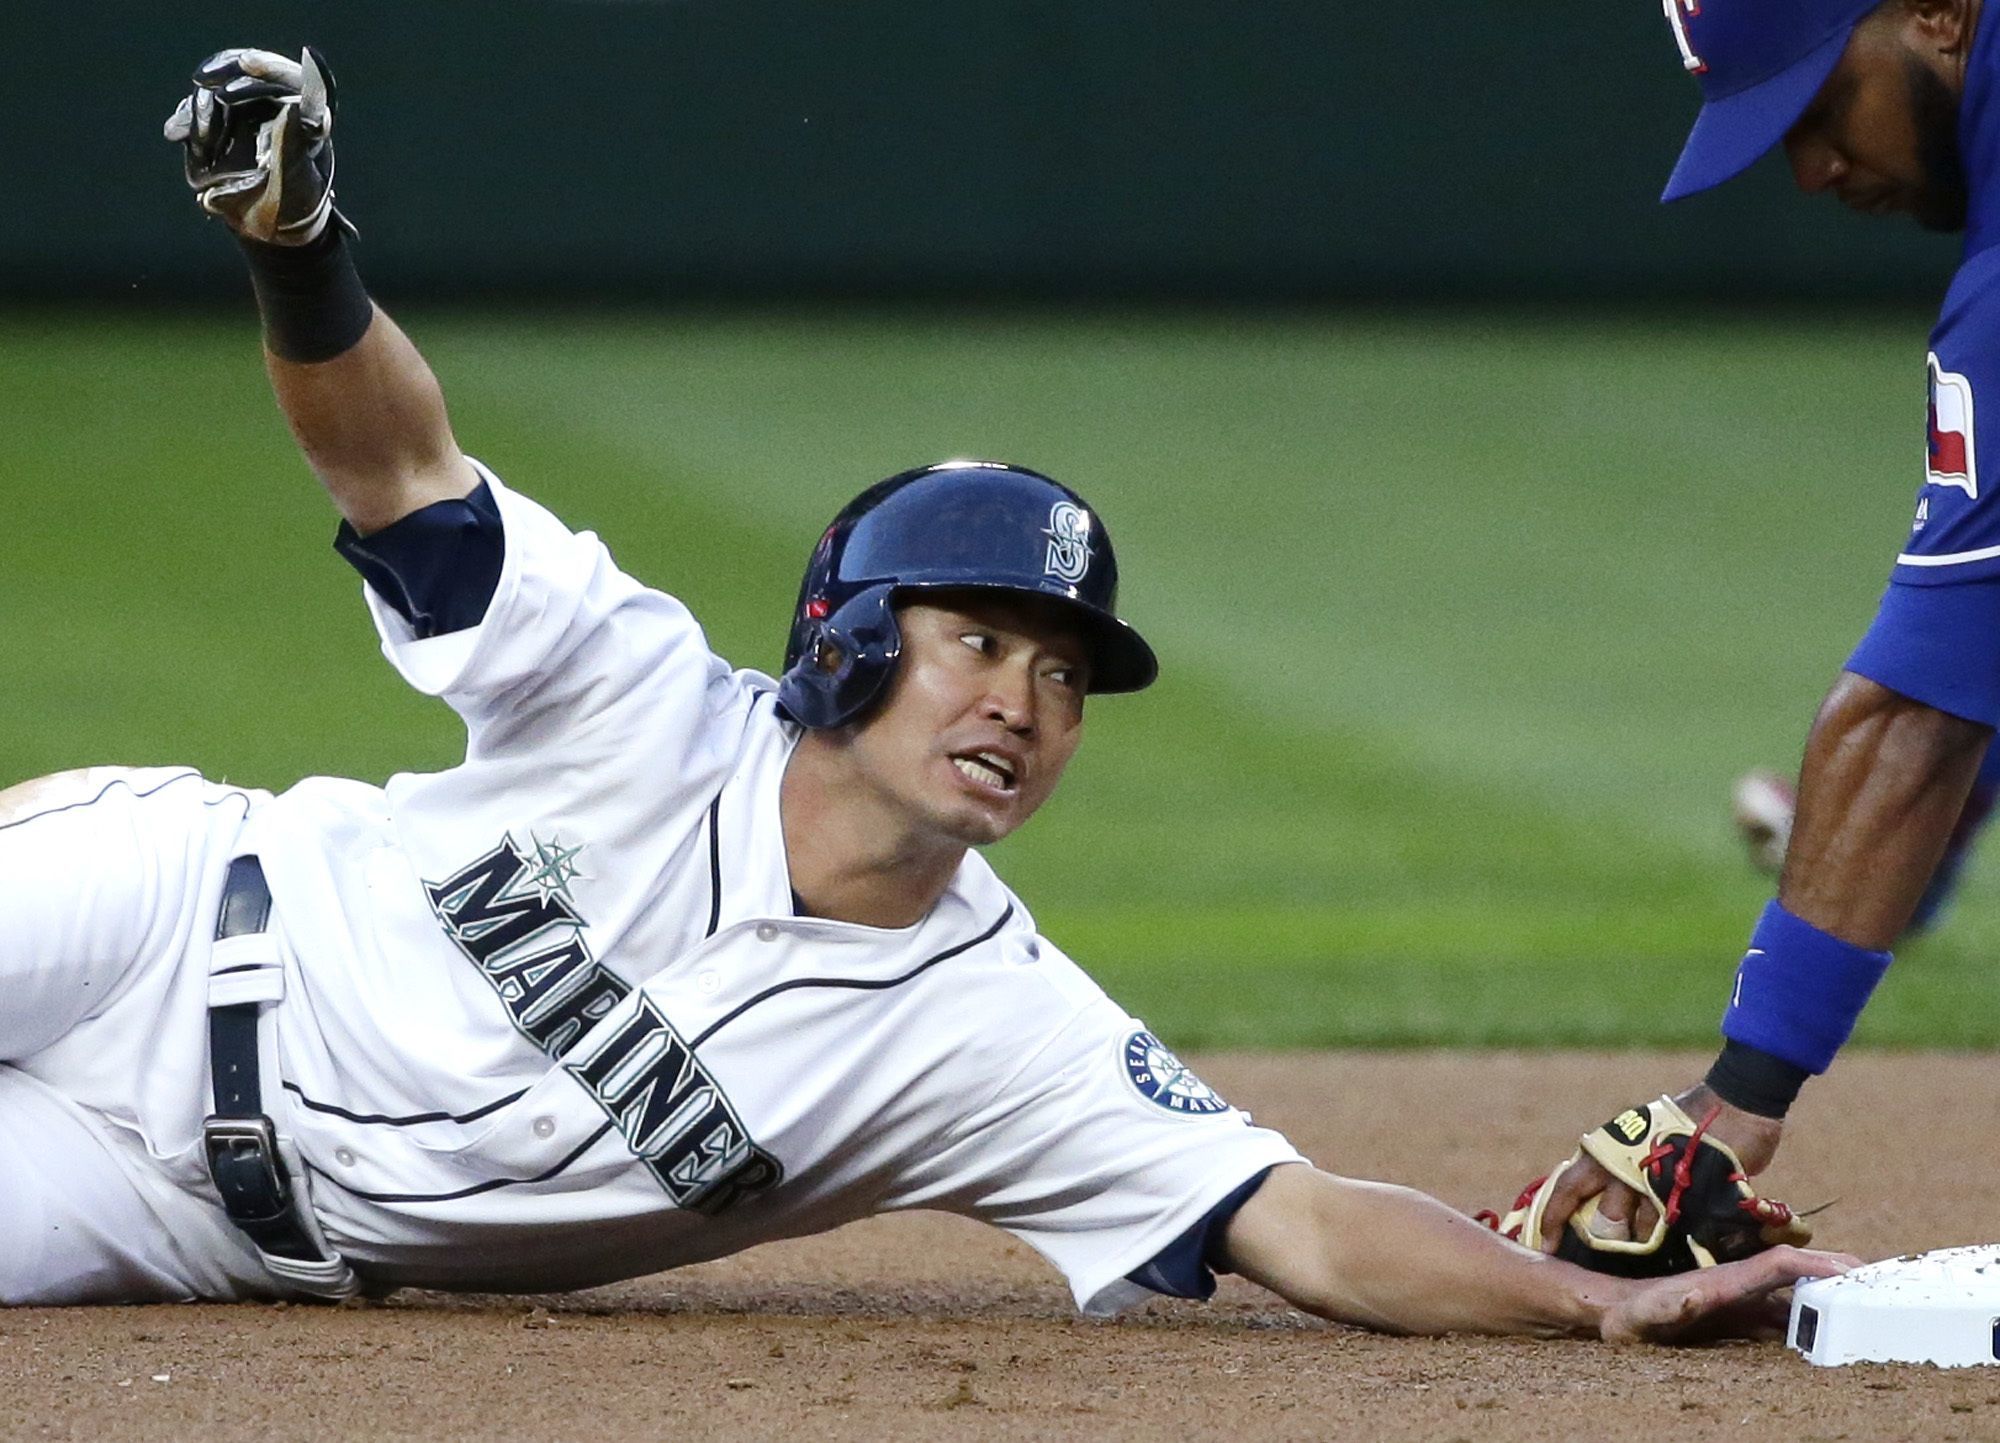 The Mariners’ Nori Aoki is tagged out by Rangers shortstop Elvis Andrus as he attempts to steal second base in the first inning of Monday’s game.